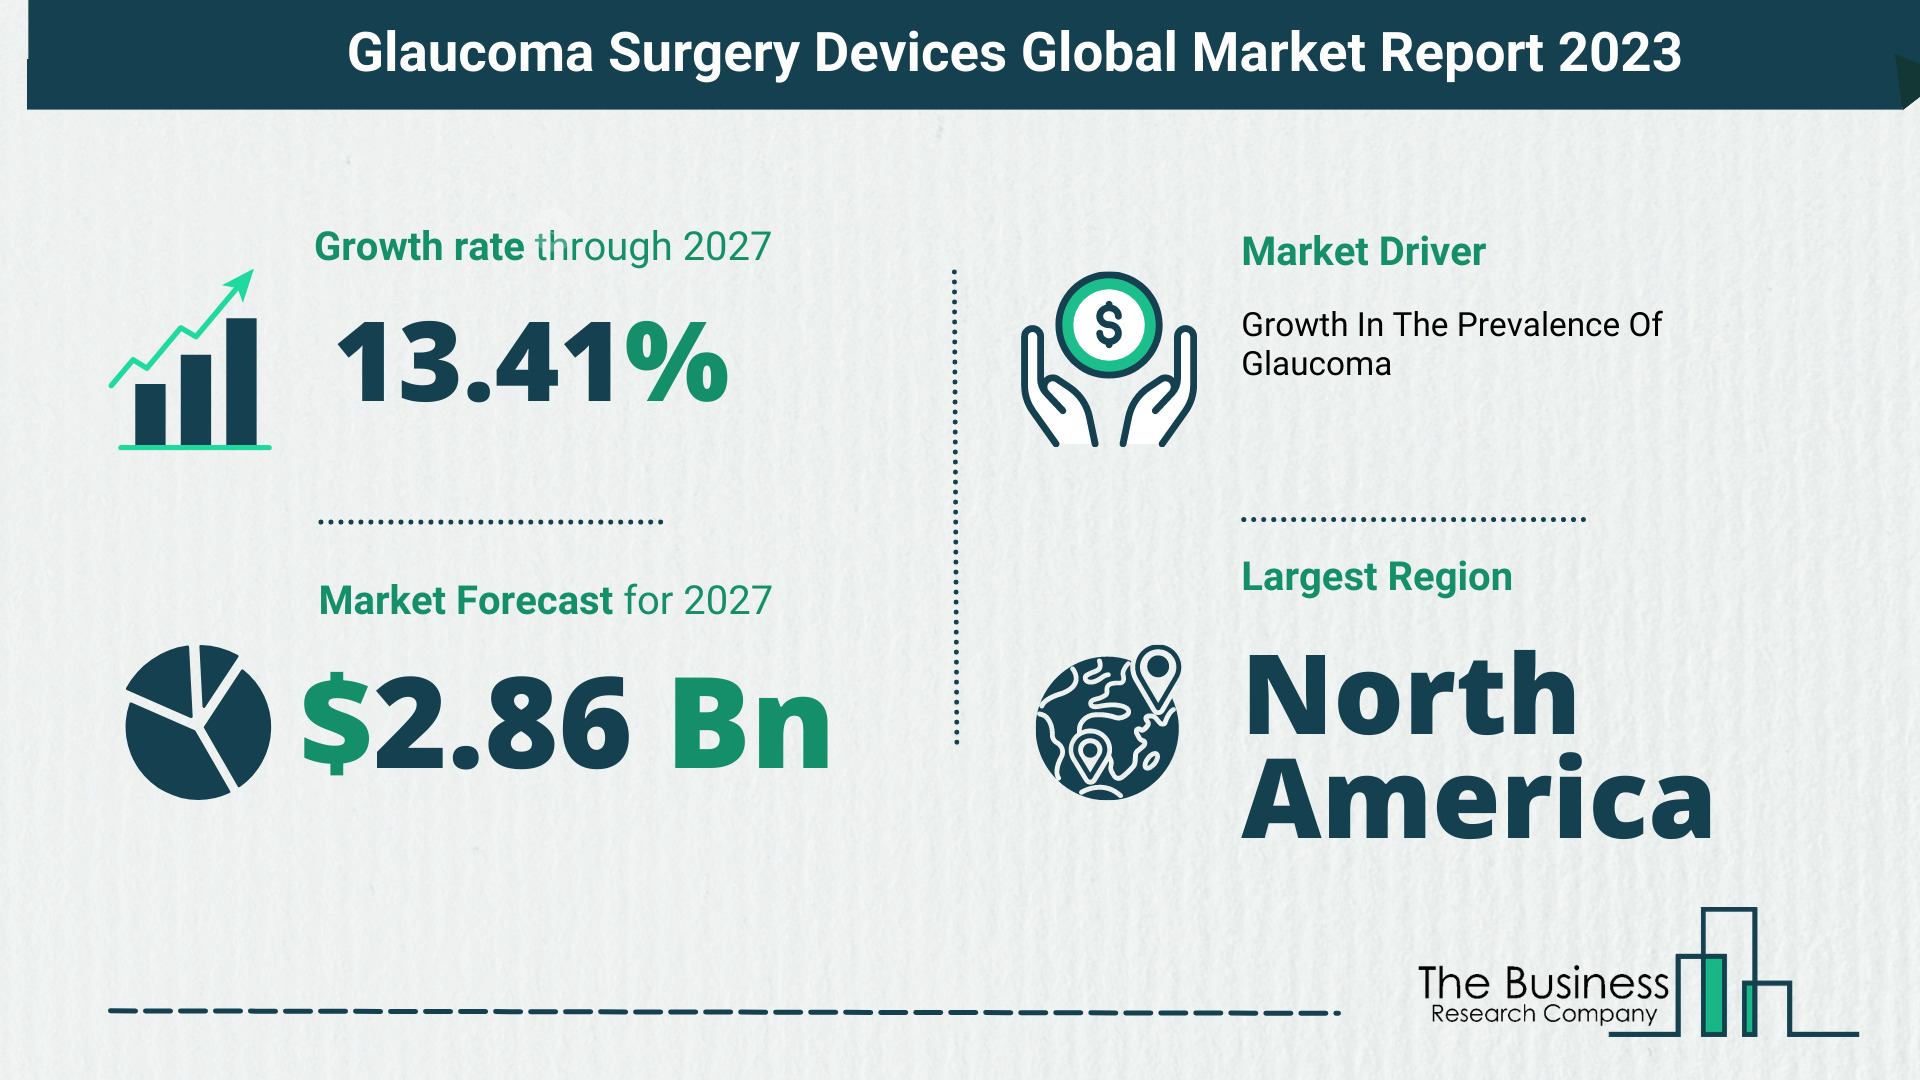 Glaucoma Surgery Devices Market Size, Share, And Growth Rate Analysis 2023